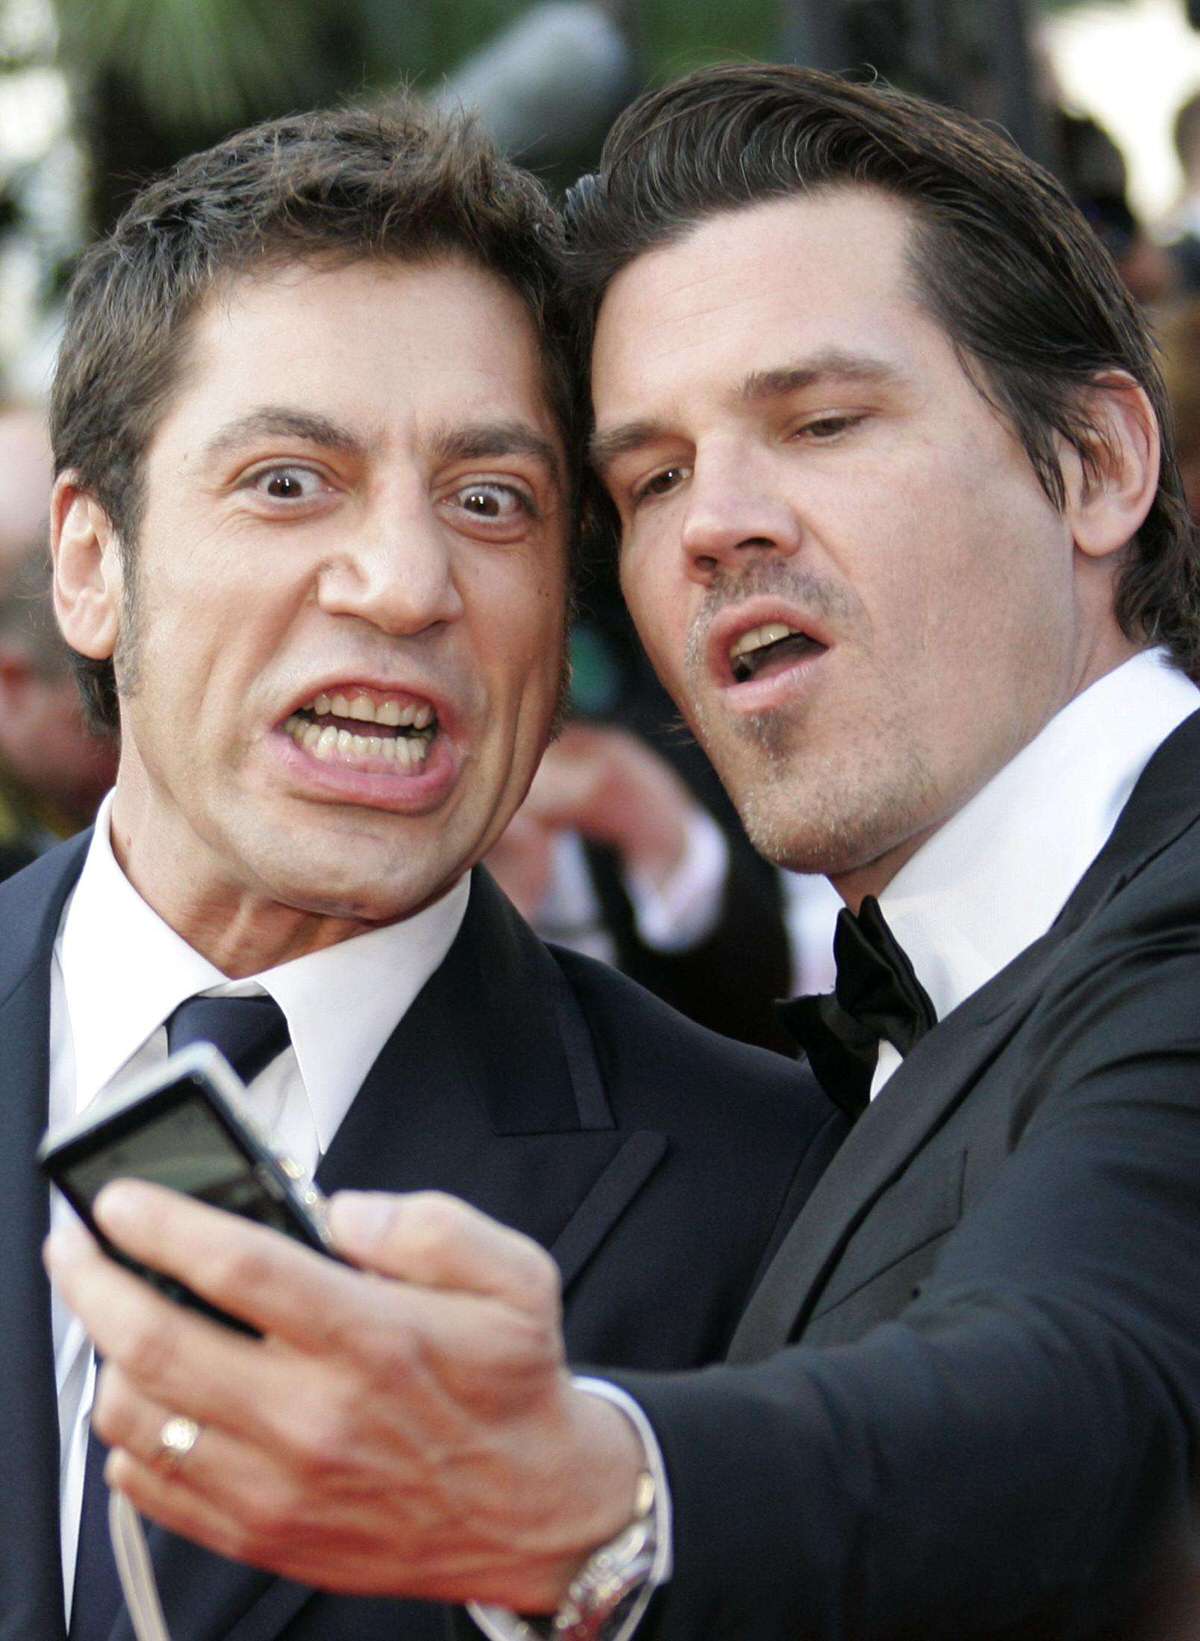 Cast members Bardem and Brolin take their own pictures at the 60th Cannes Film Festival